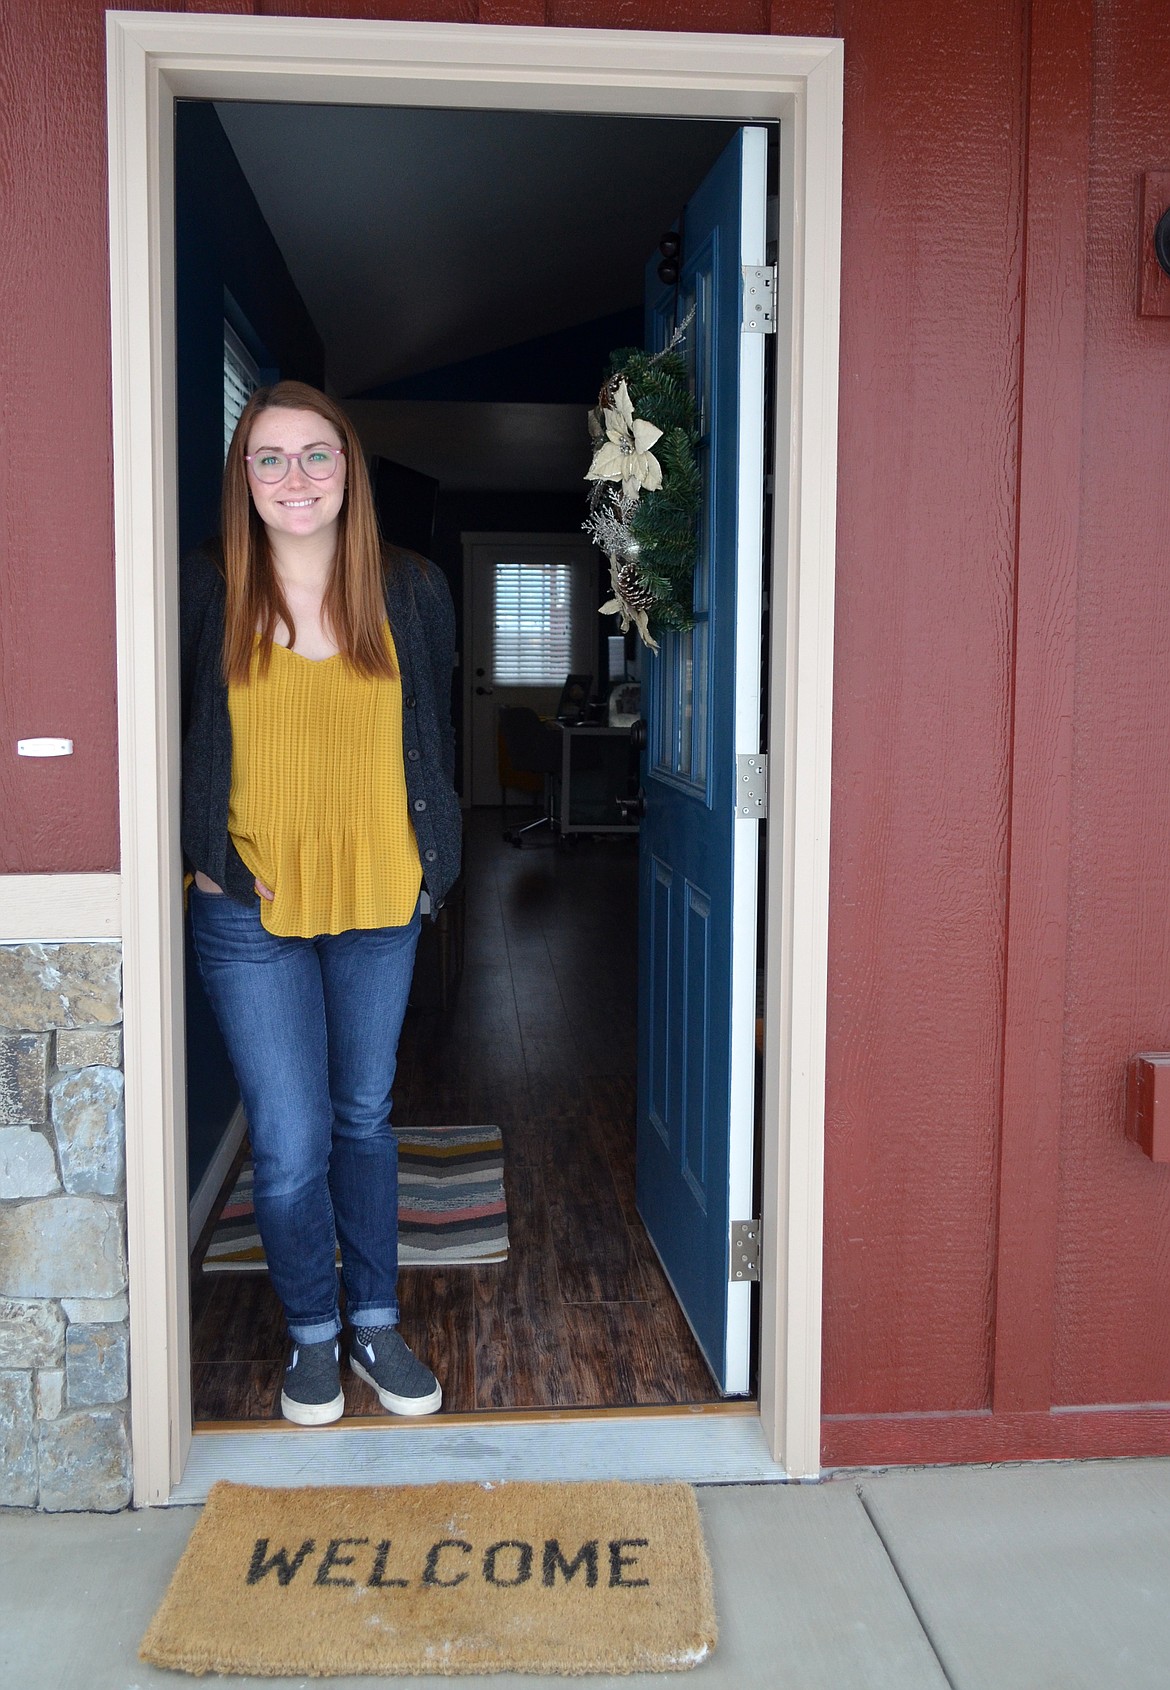 Talia Heck, 23, rents her guest room to travelers on Airbnb. It&#146;s a welcome new income source, while working part-time and taking online classes. (Seaborn Larson/Daily Inter Lake)